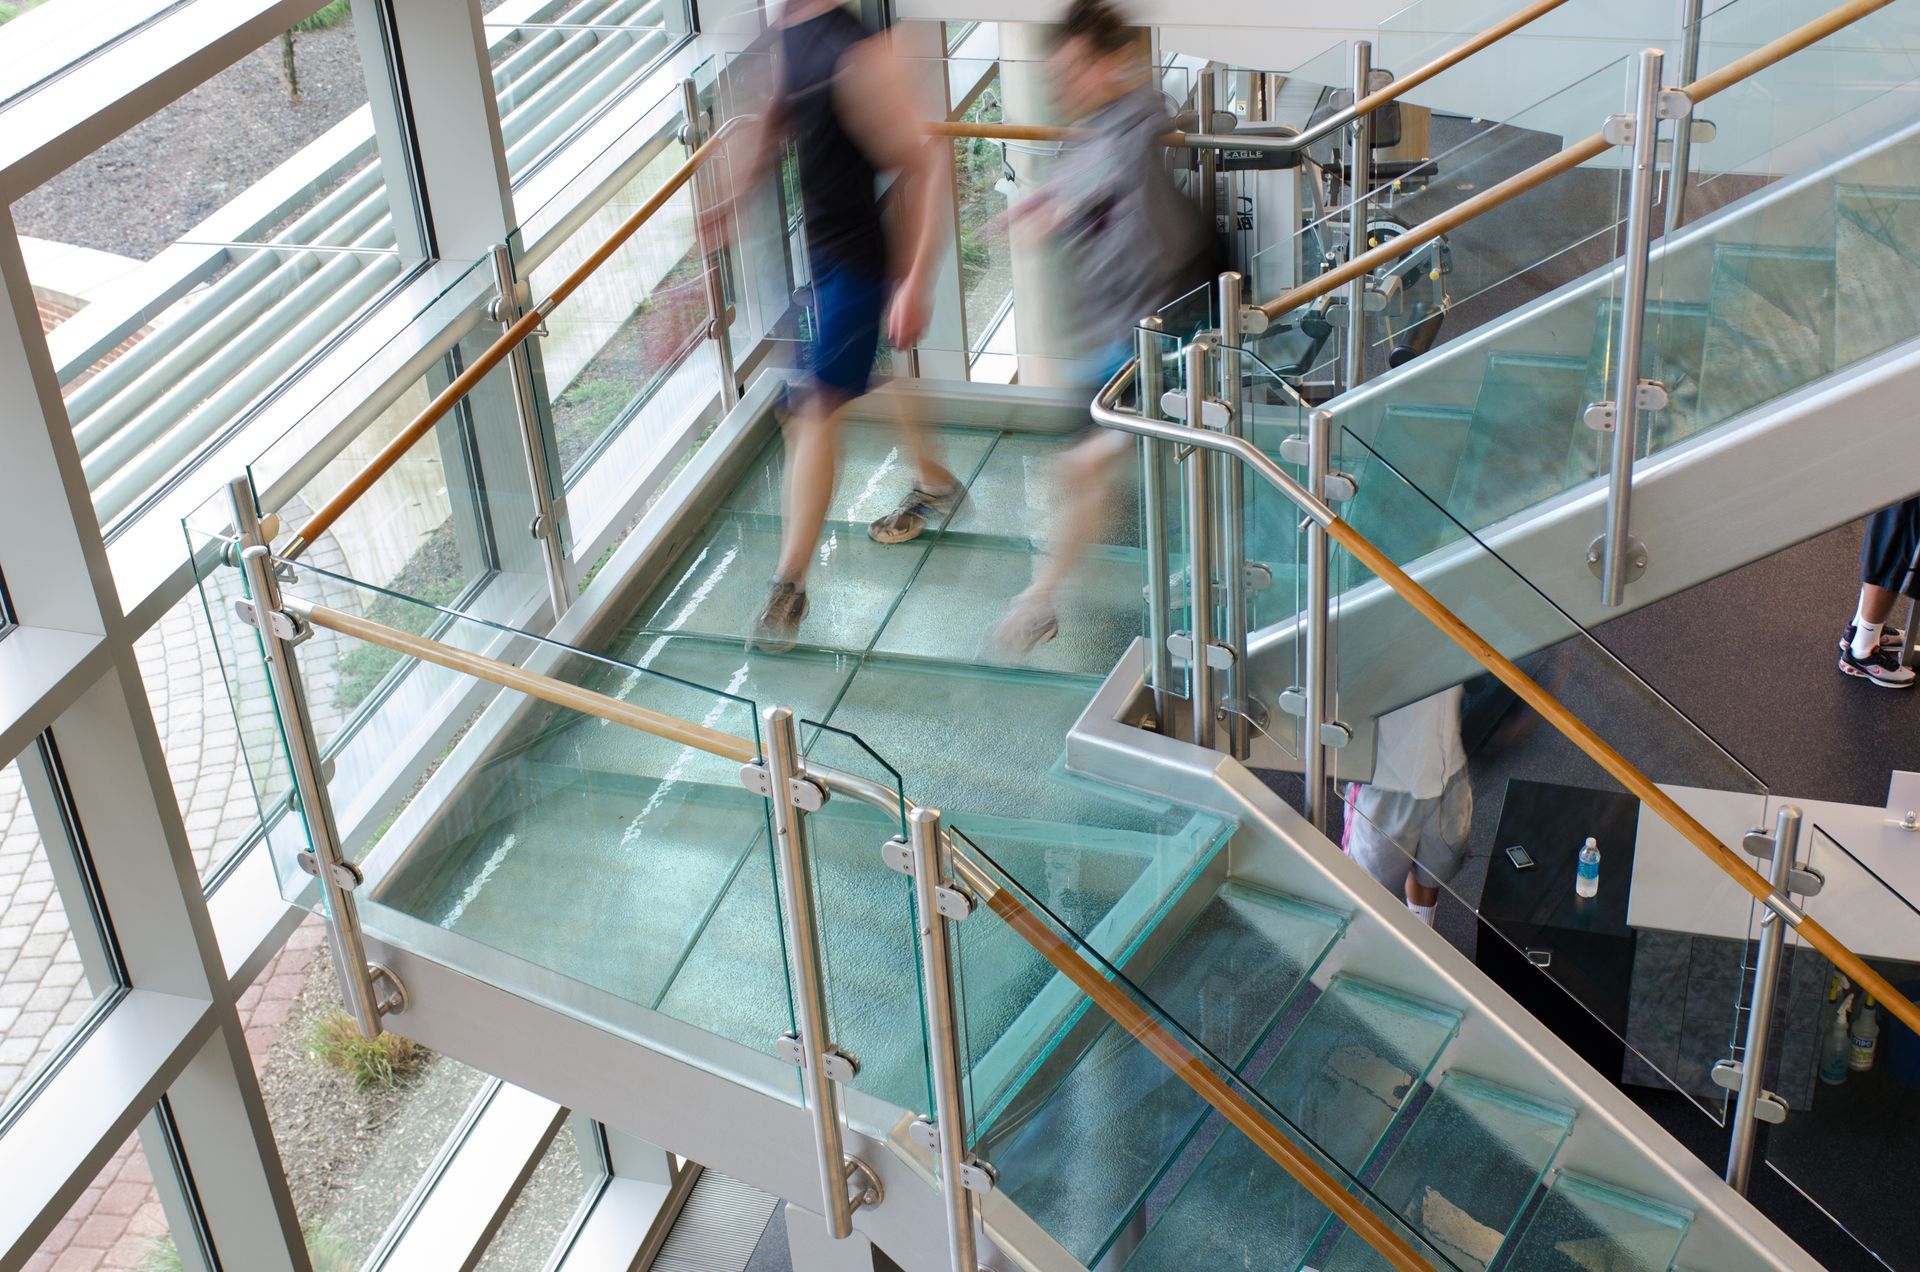 People walking safely on a glass staircase.